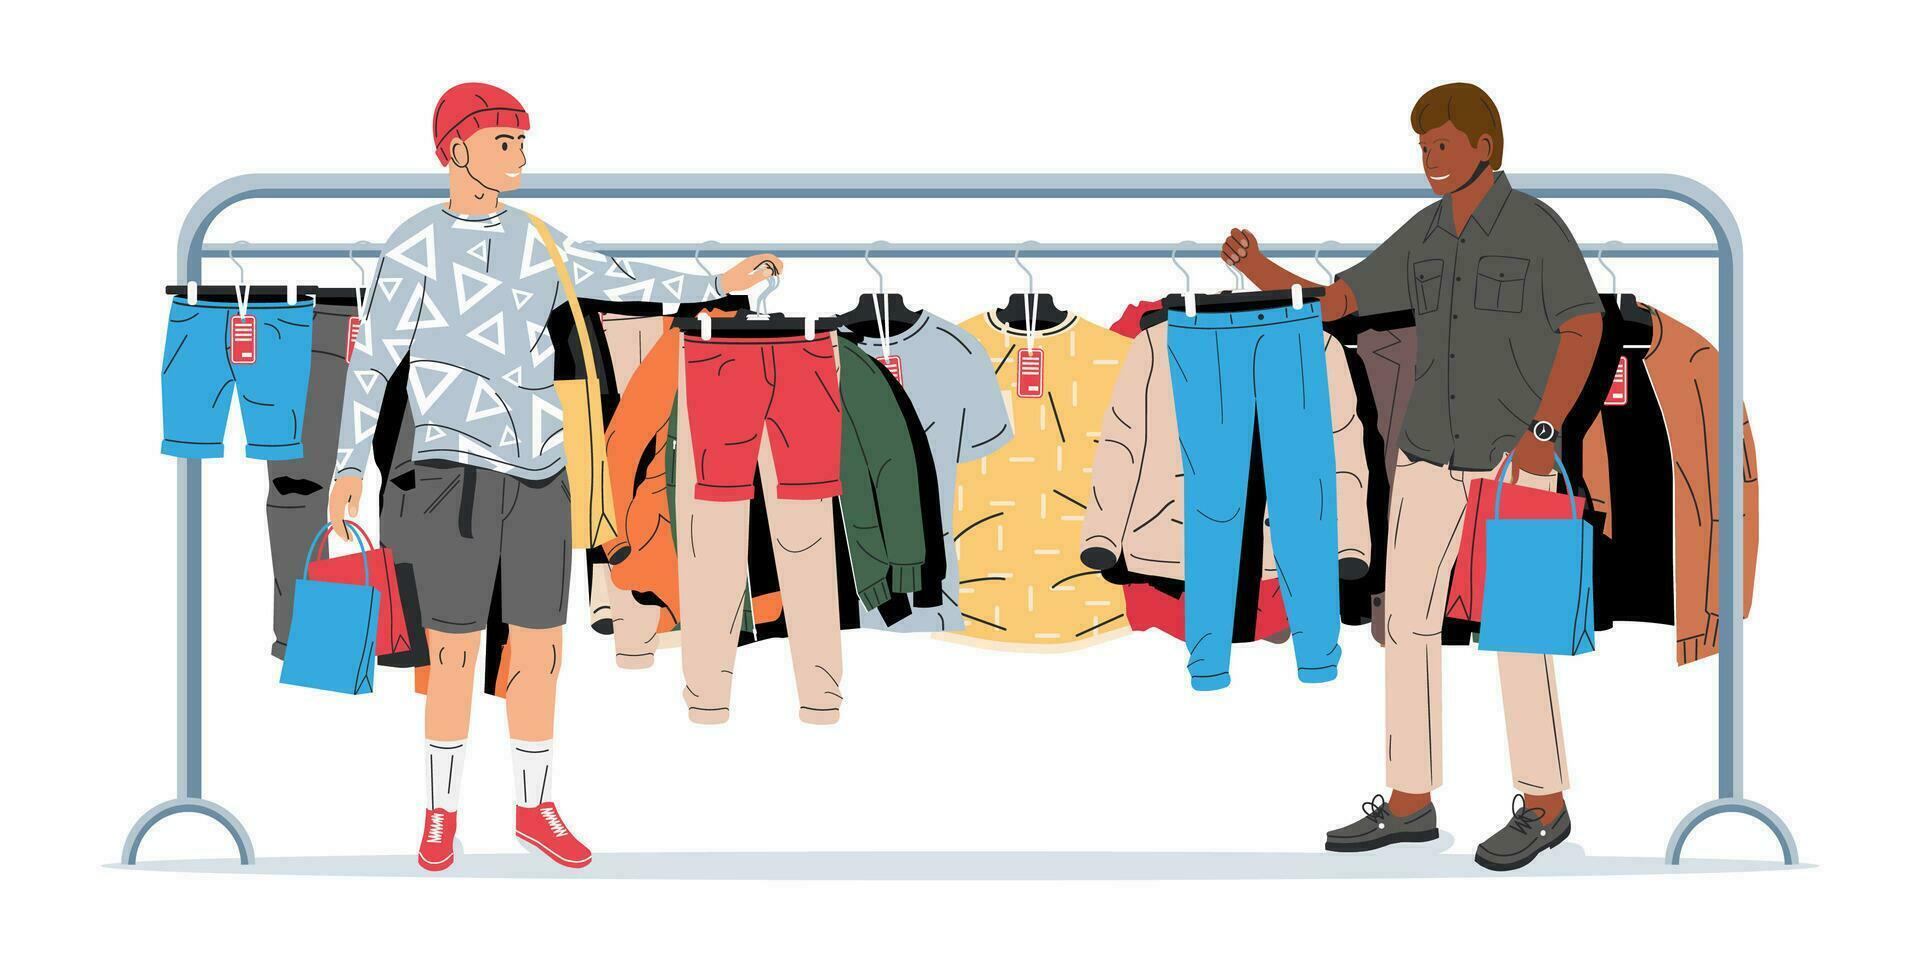 Man Near Rack with Clothes. Mens Clothes on Hanger. Home or Shop Wardrobe. Clothes and Accessories. Various Hanging Clothing. Jacket, Shirt, Jeans, Pants. Cartoon Flat Vector Illustration